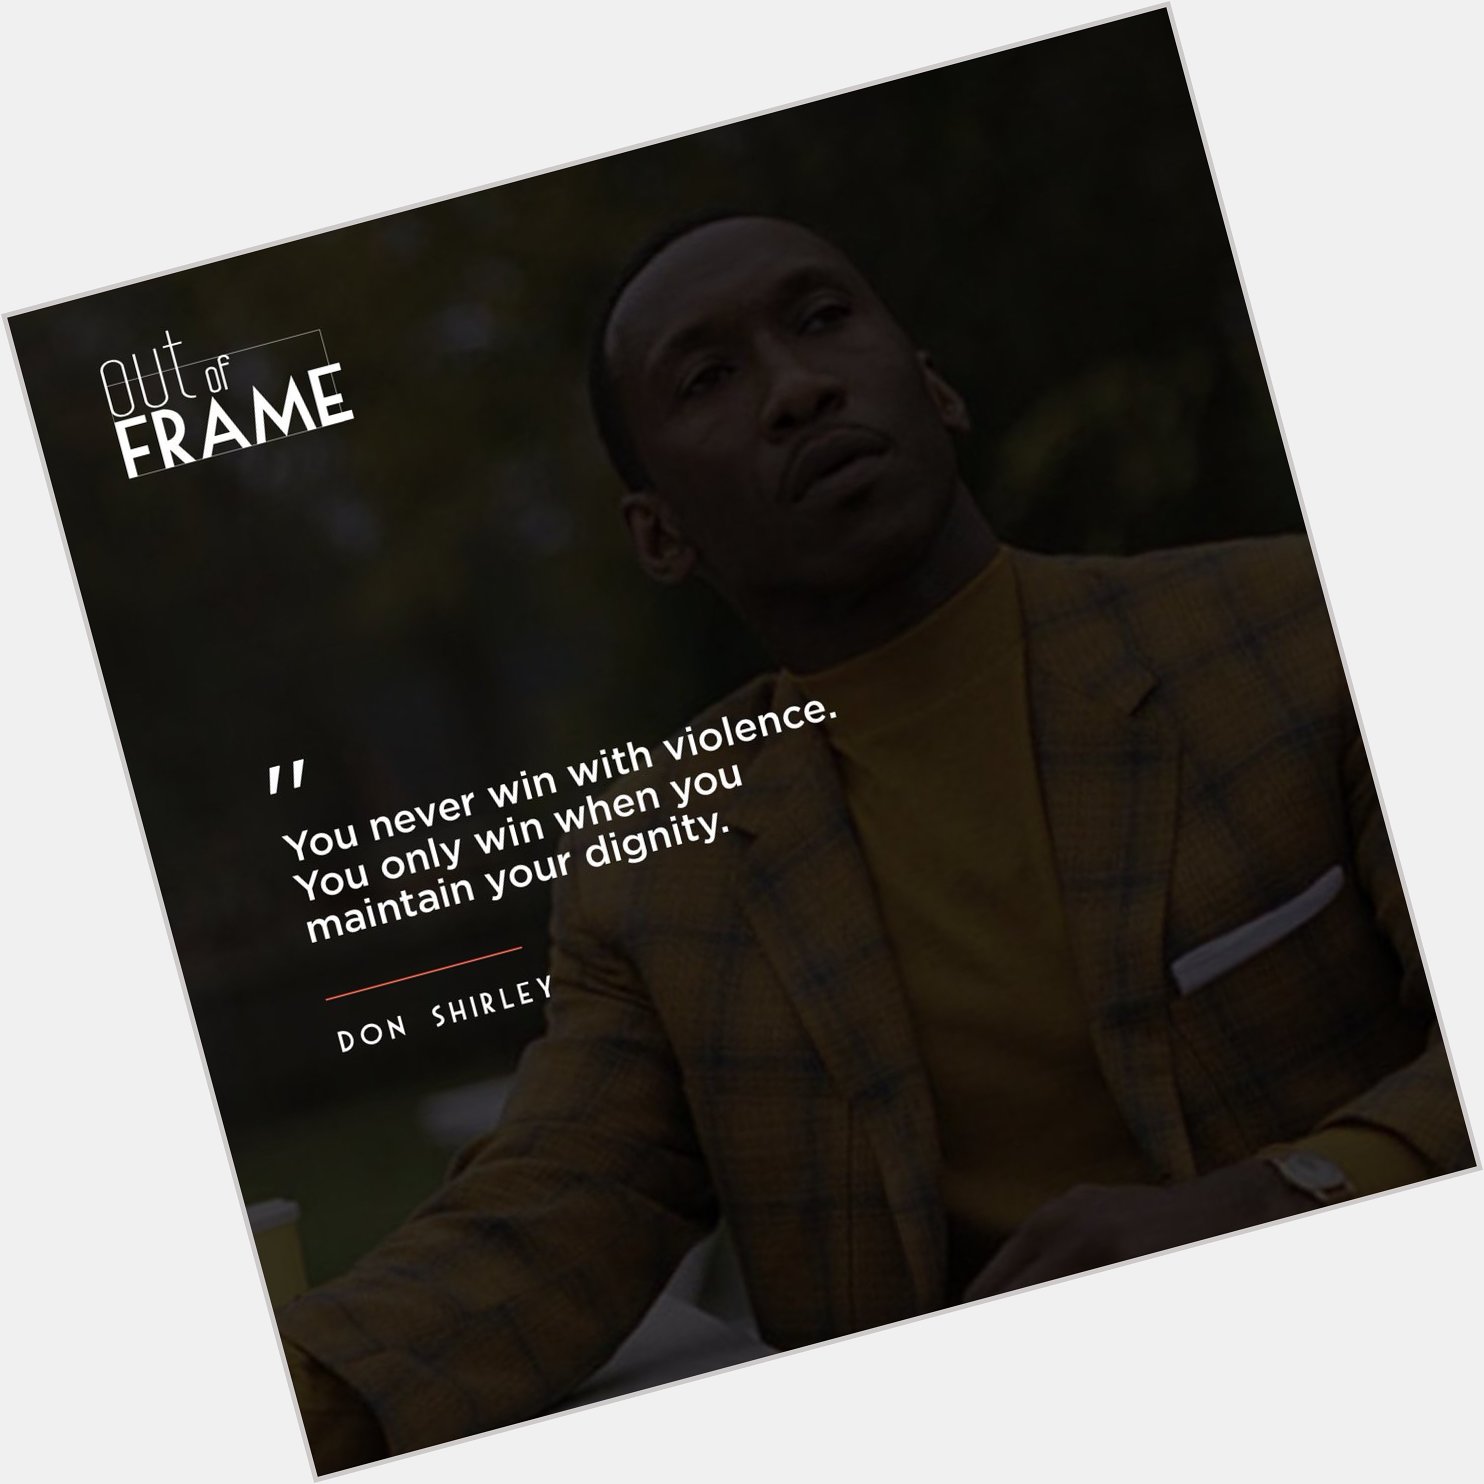 Happy birthday to Mahershala Ali! 

This quote is from his role in the movie Green Book: 